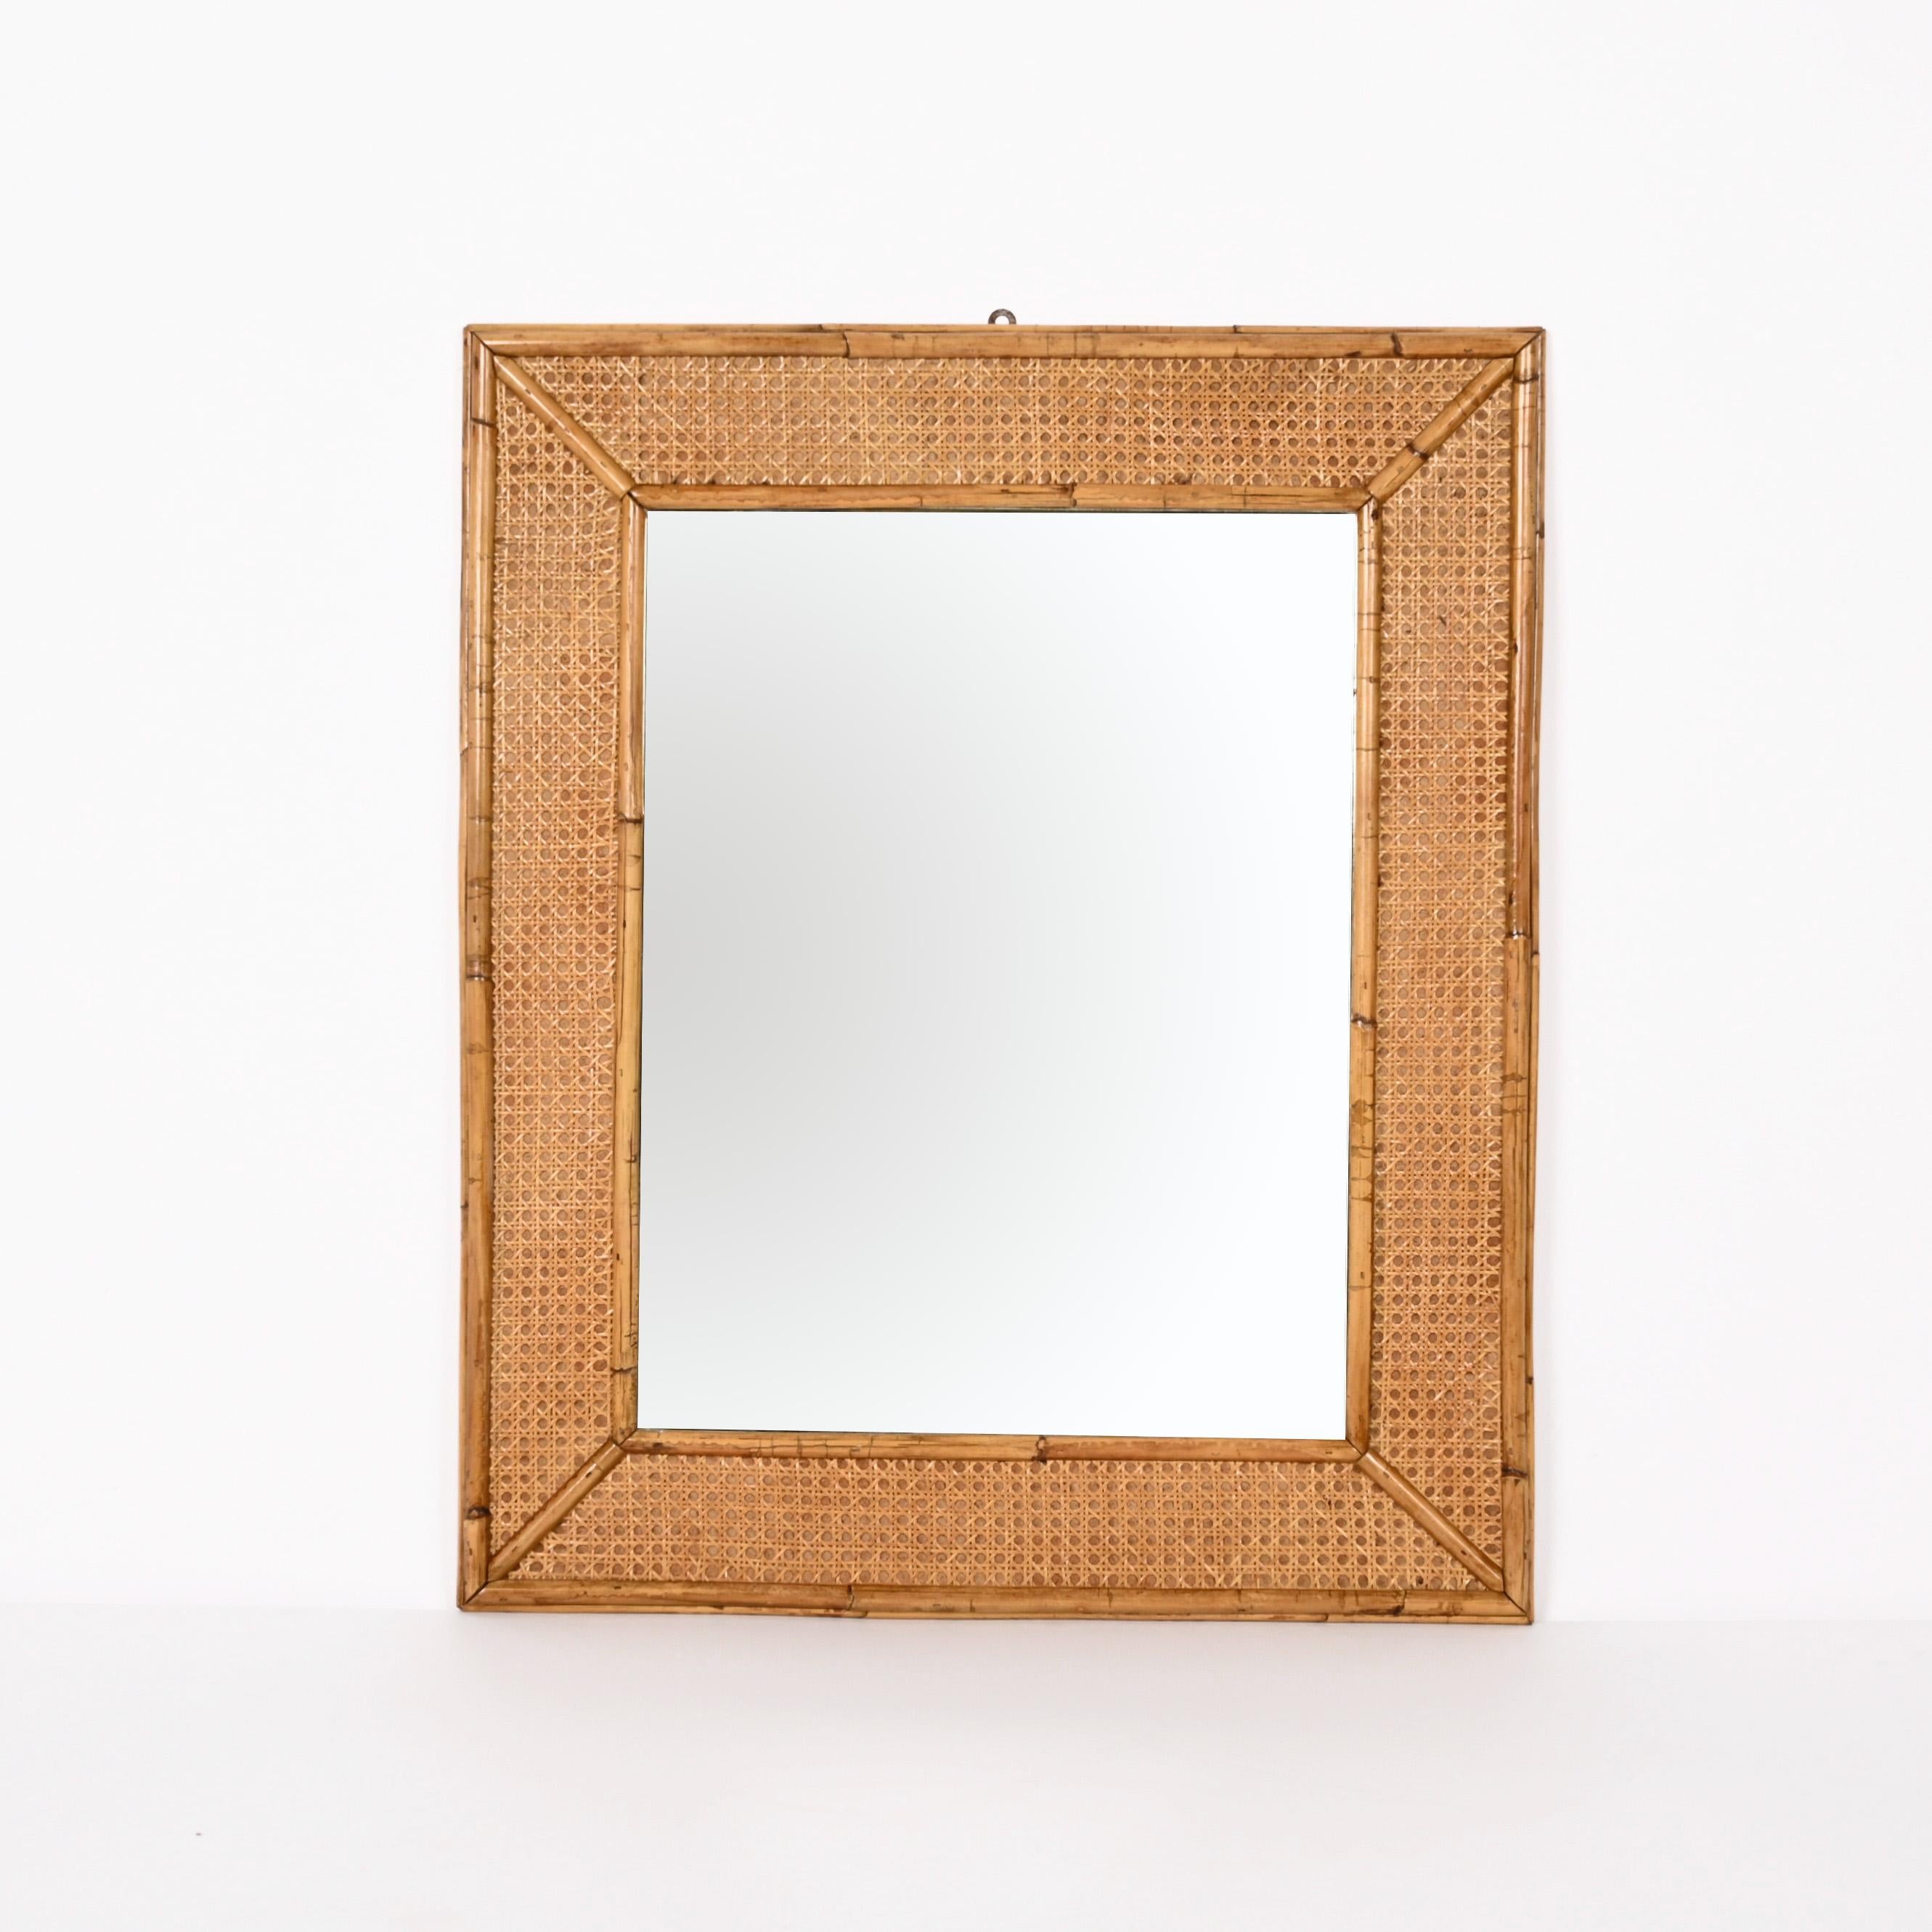 Midcentury Rectangular Italian Mirror with Bamboo and Vienna Straw Frame, 1970s For Sale 3